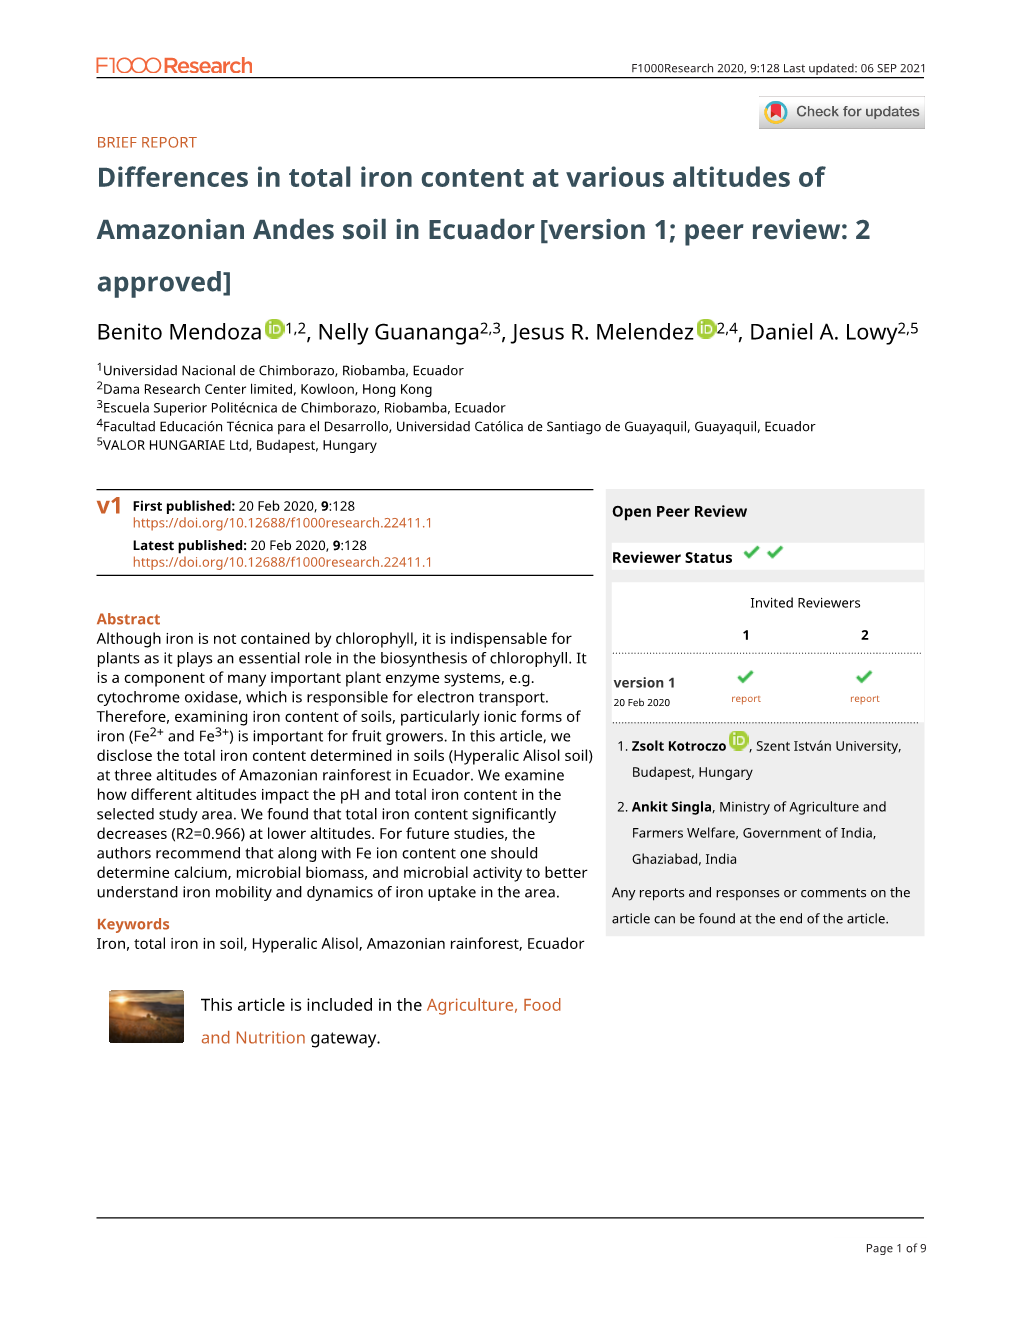 Differences in Total Iron Content at Various Altitudes of Amazonian